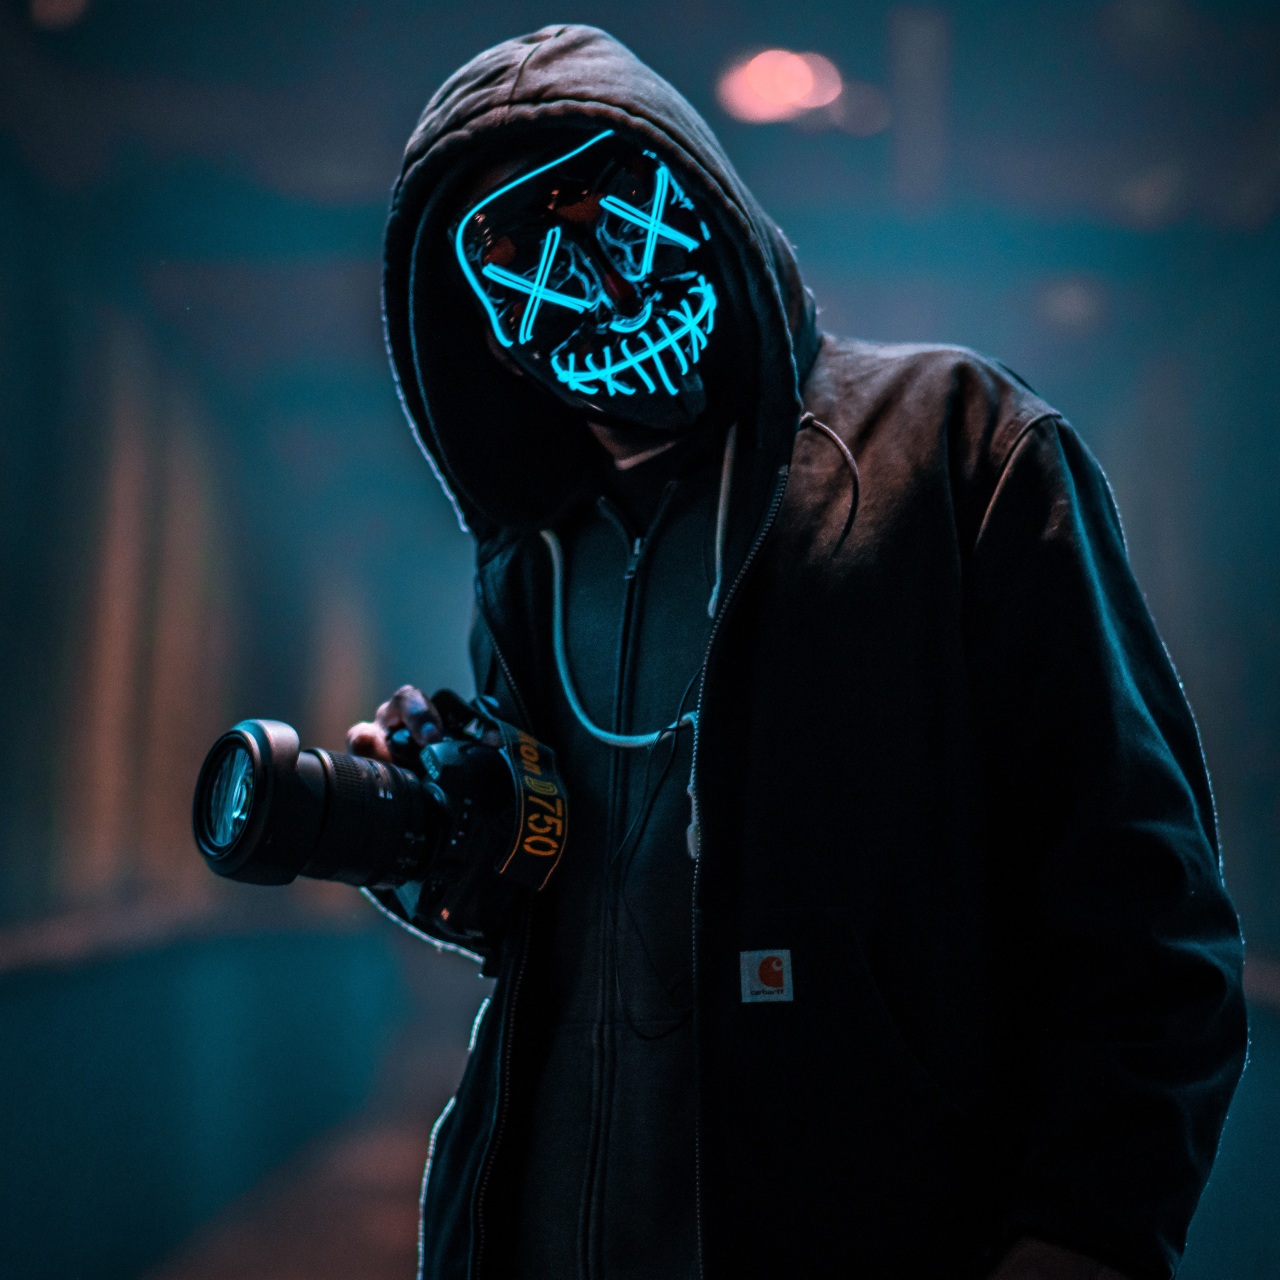 Mask Guy With Dslr - 4k Wallpapers - 40.000+ ipad wallpapers 4k - 4k ...